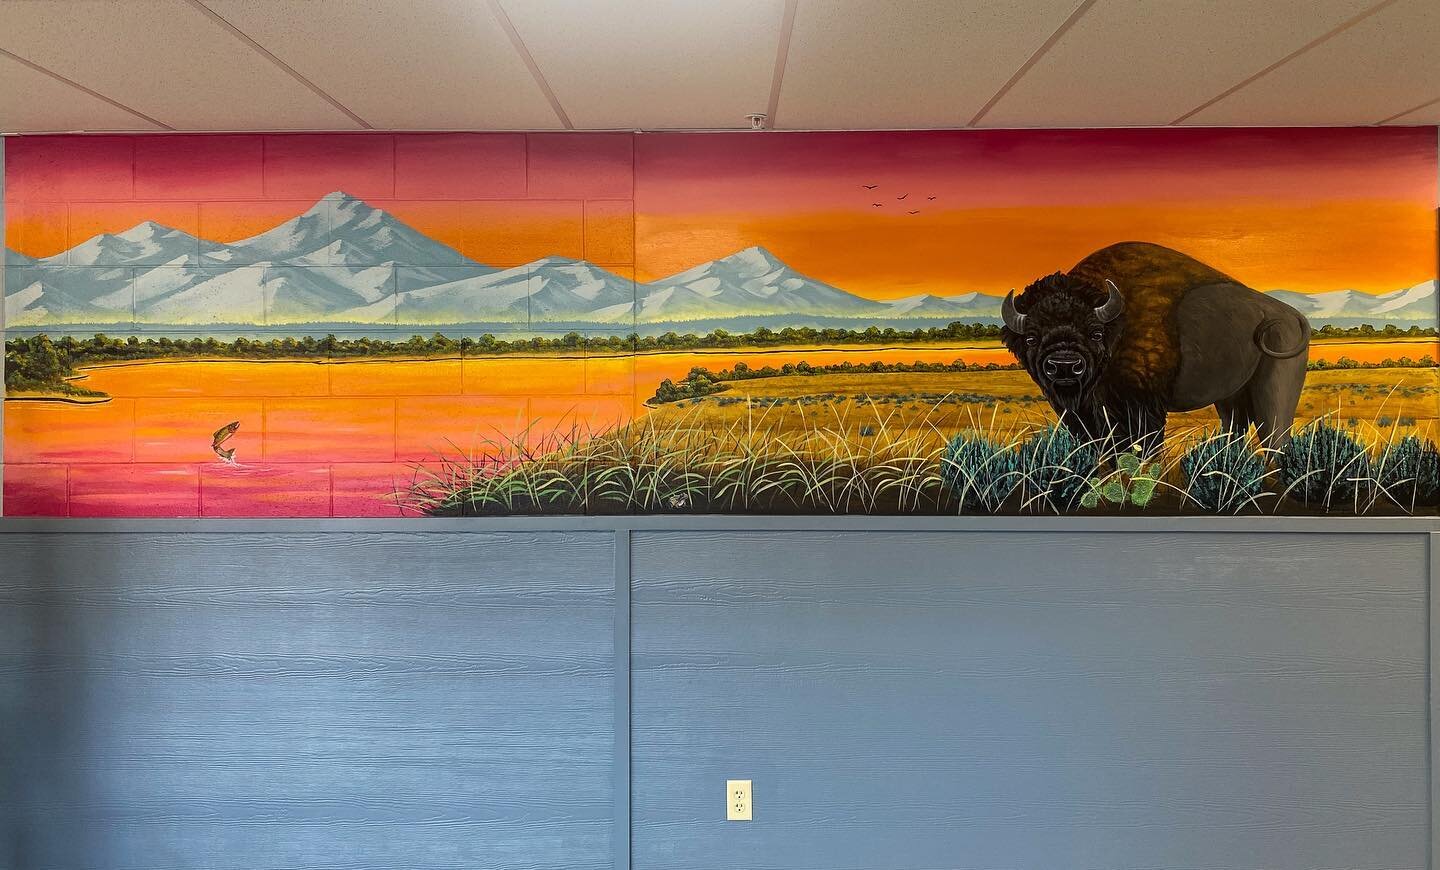 I have a passion for sharing my art with those who may not always have access to fine art, so I&rsquo;m honored to have had the opportunity to create these murals inside the waiting room of the Community Crisis Center! It is my dream that my works wi